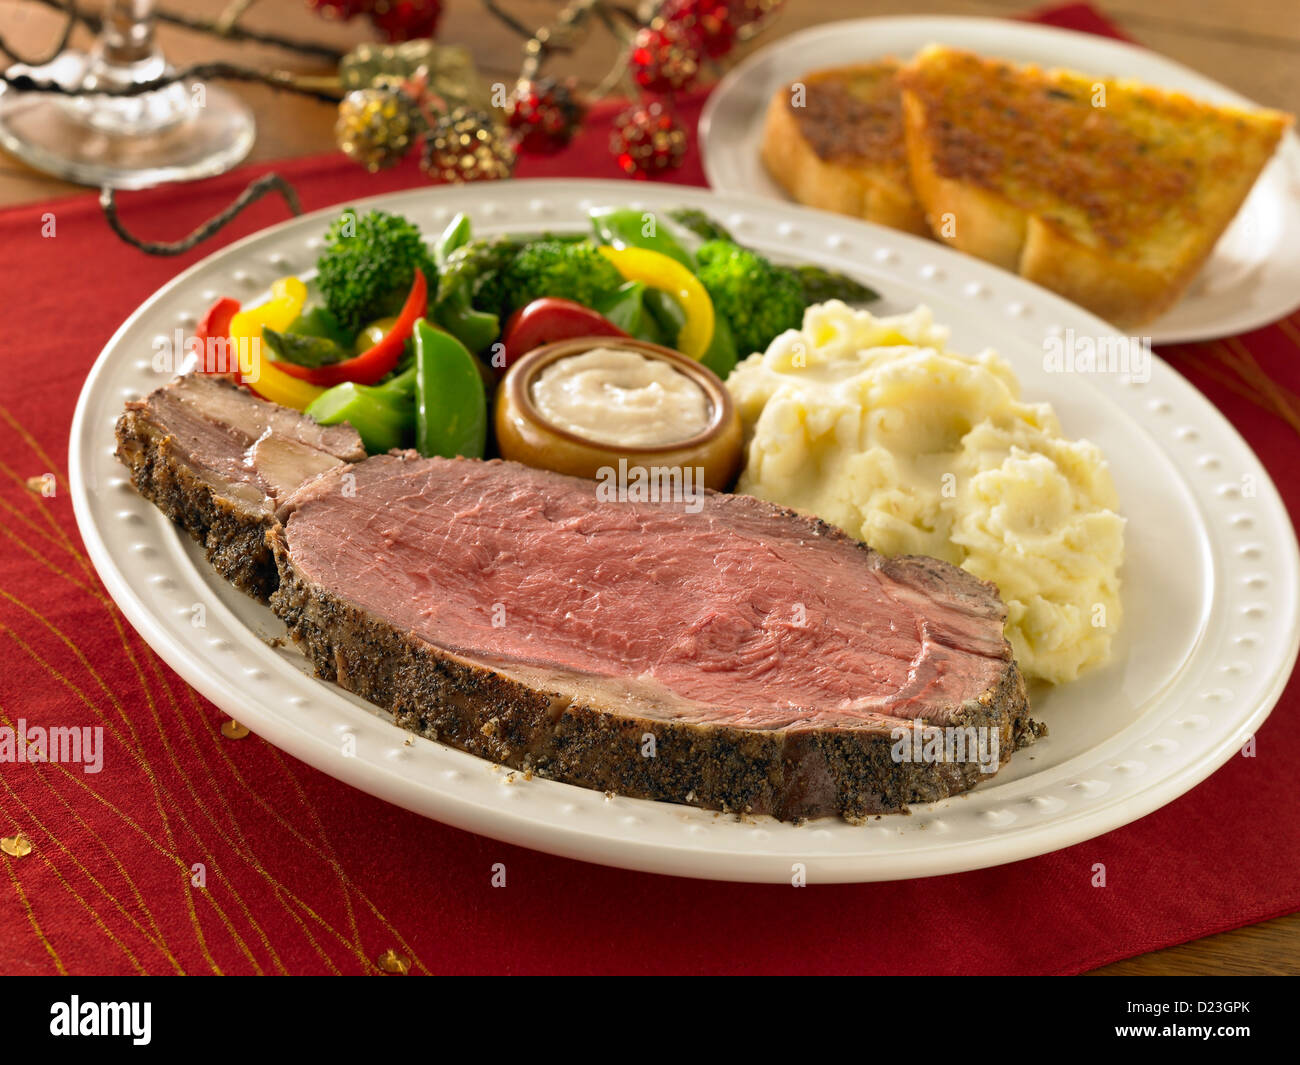 Prime Rib Dinner With Mashed Potatoes And Vegetables In A Holiday Setting Stock Photo Alamy